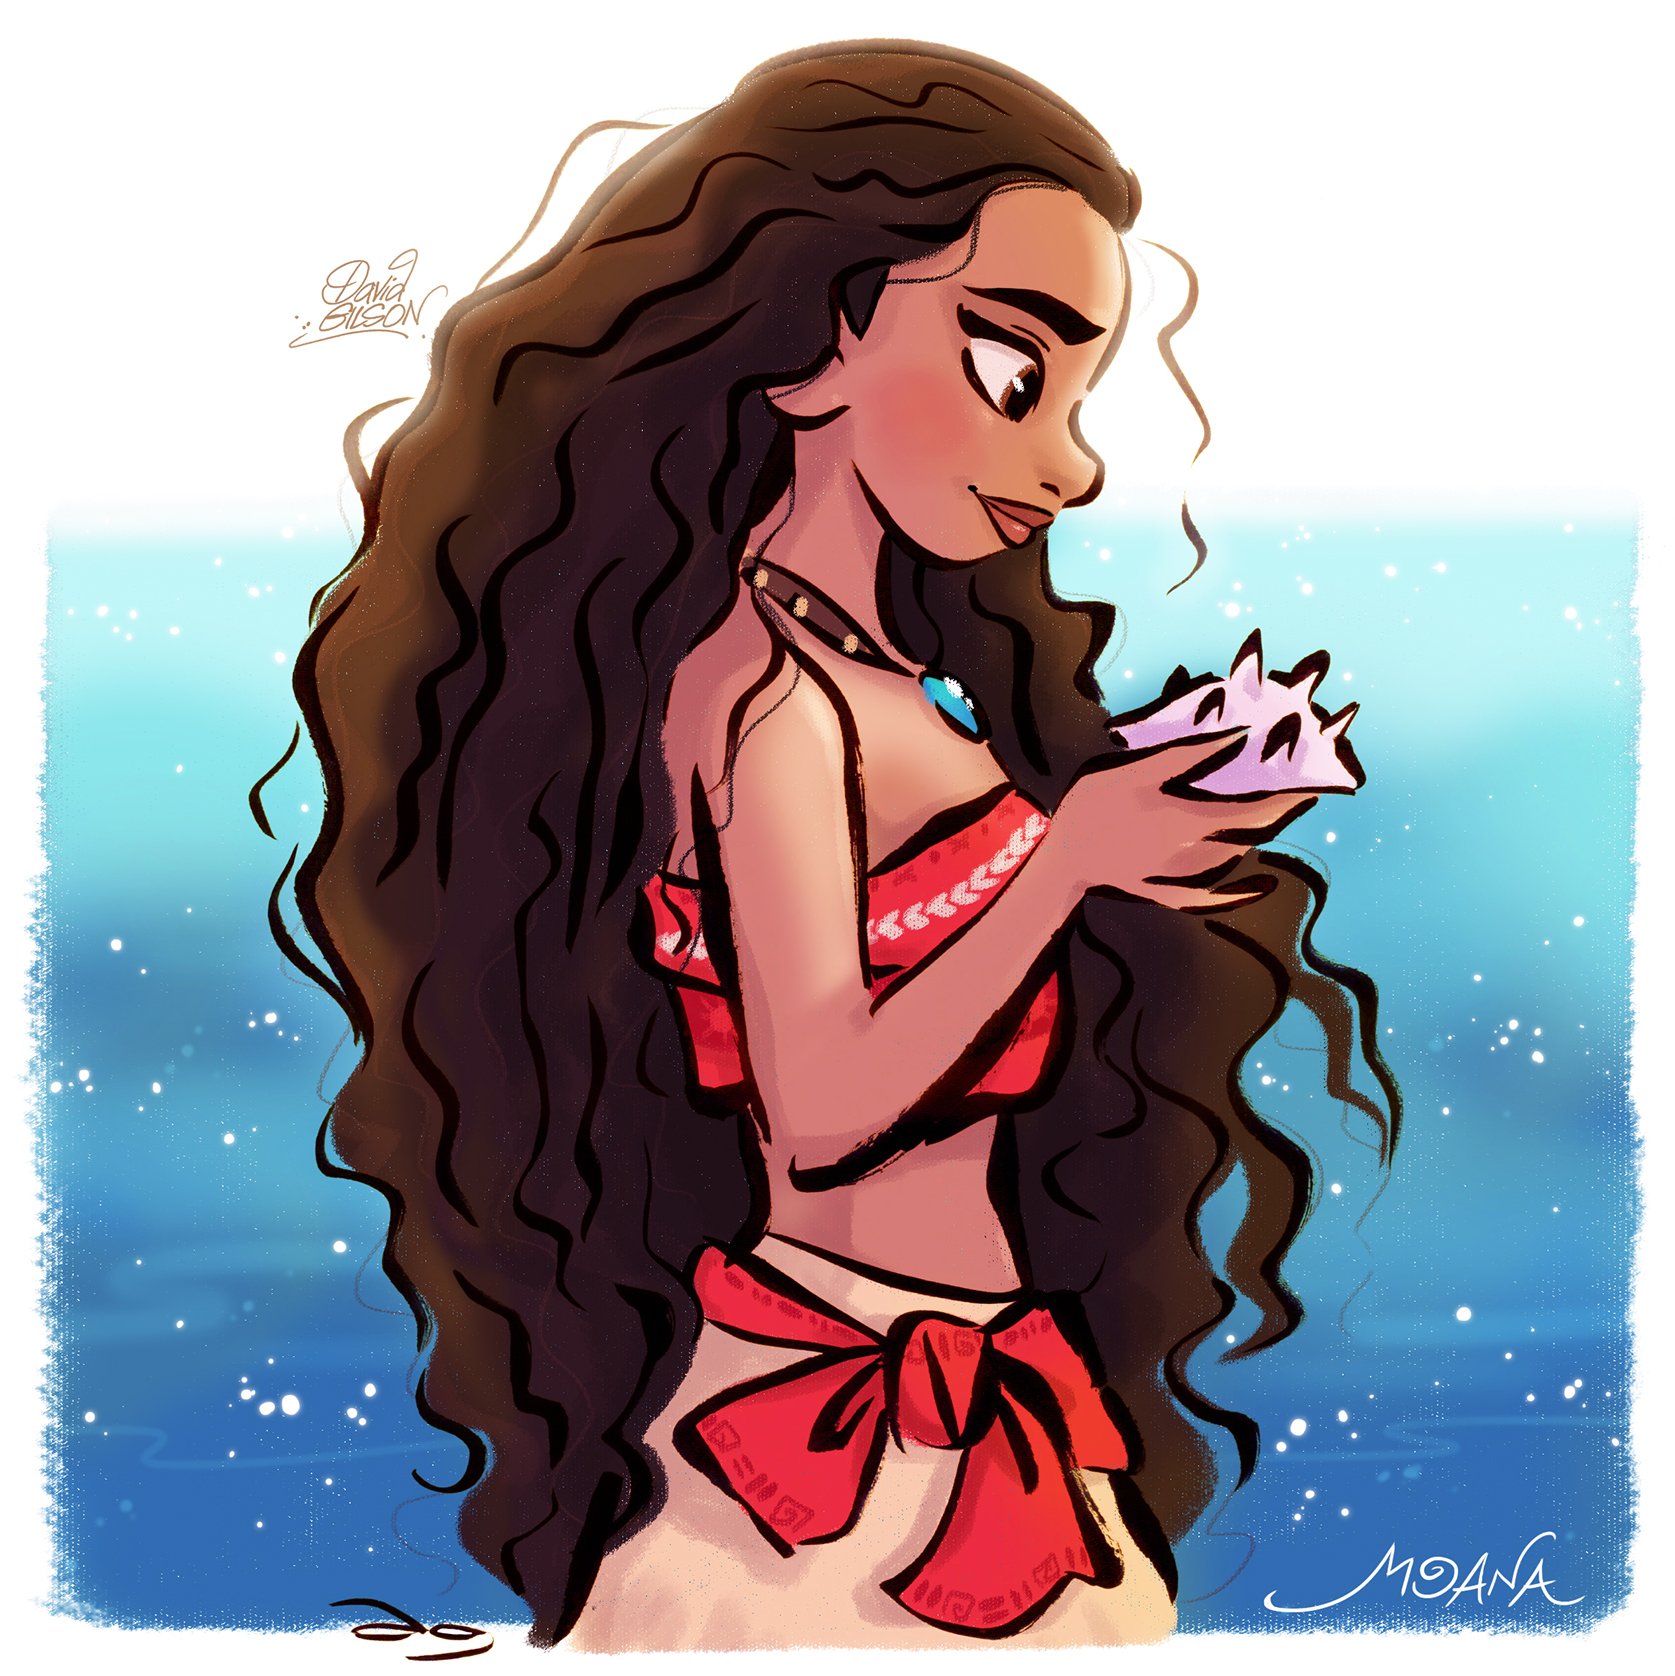 Put some island beauty on your desktop with these Moana 